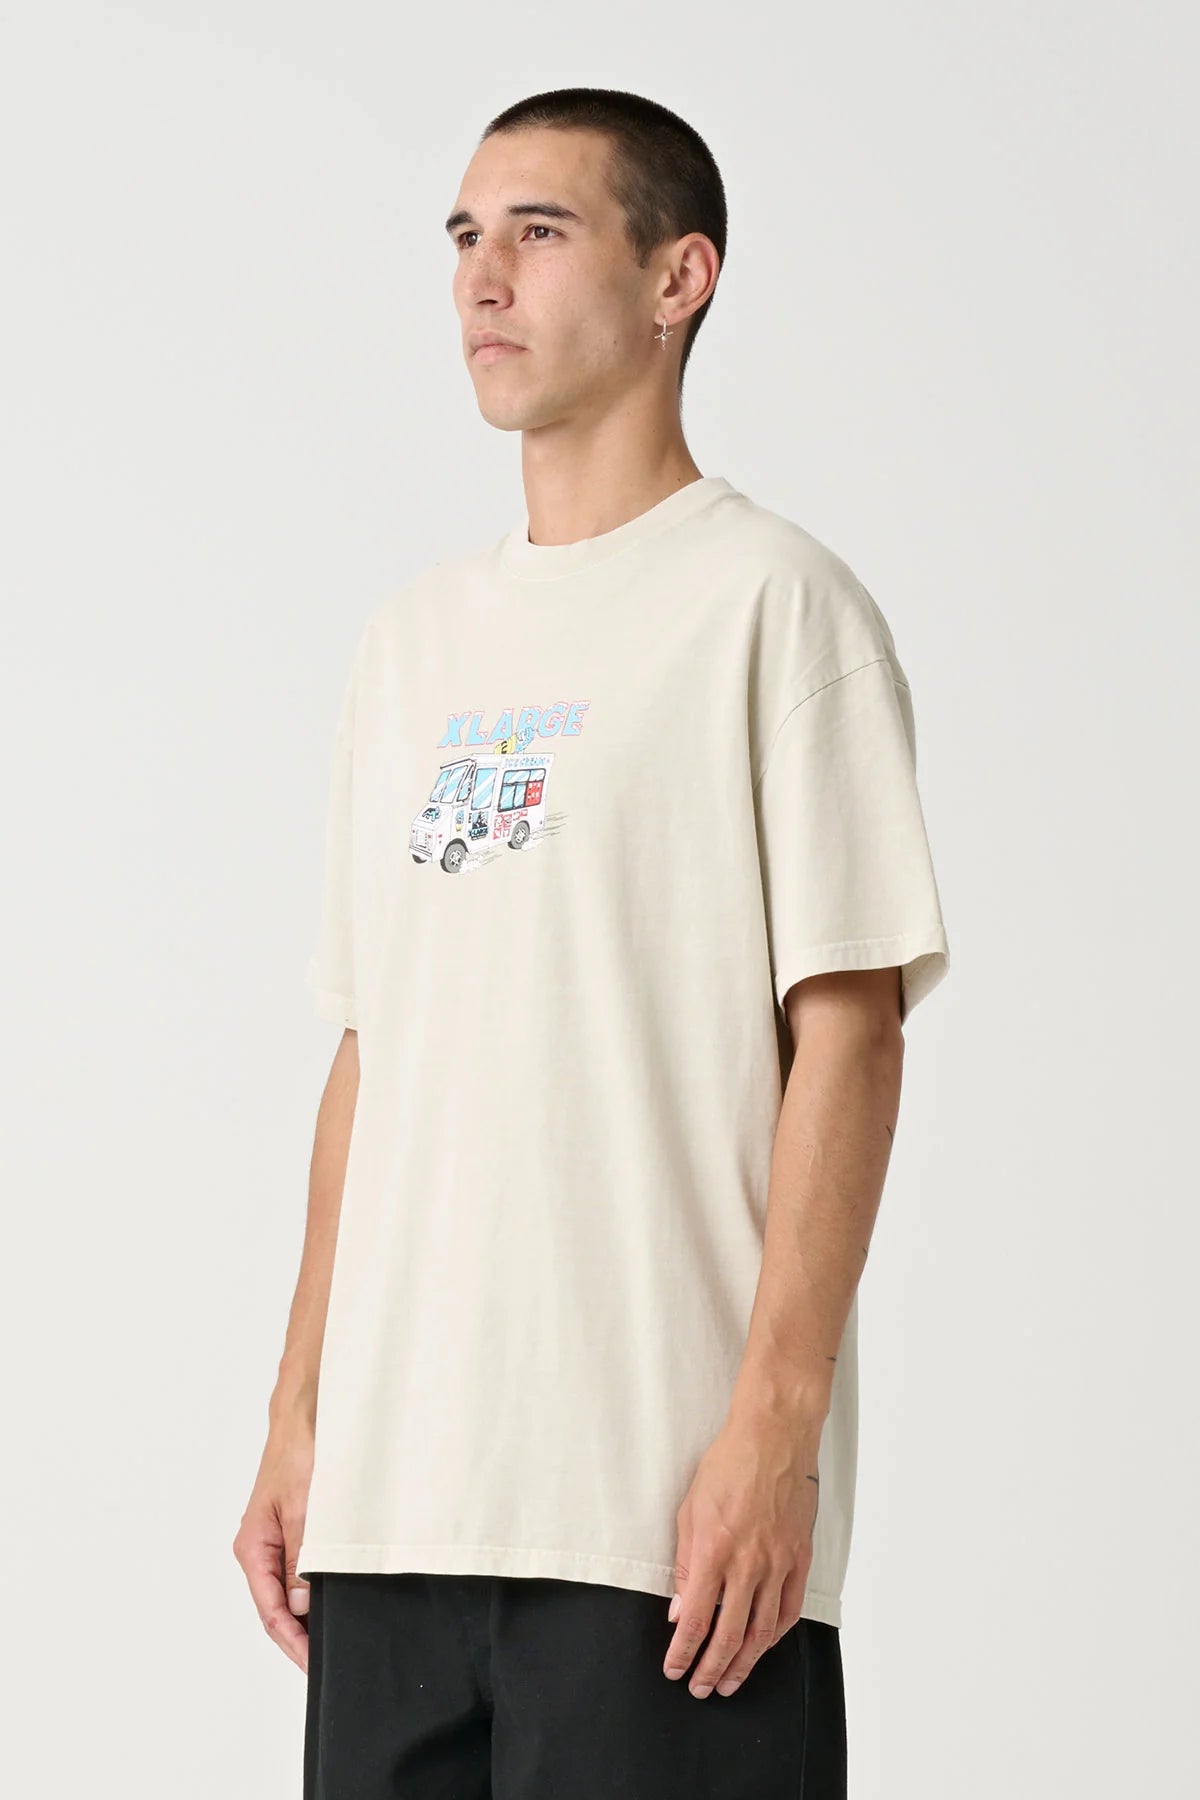 XLARGE Whippy Mens Tee - Pigment White